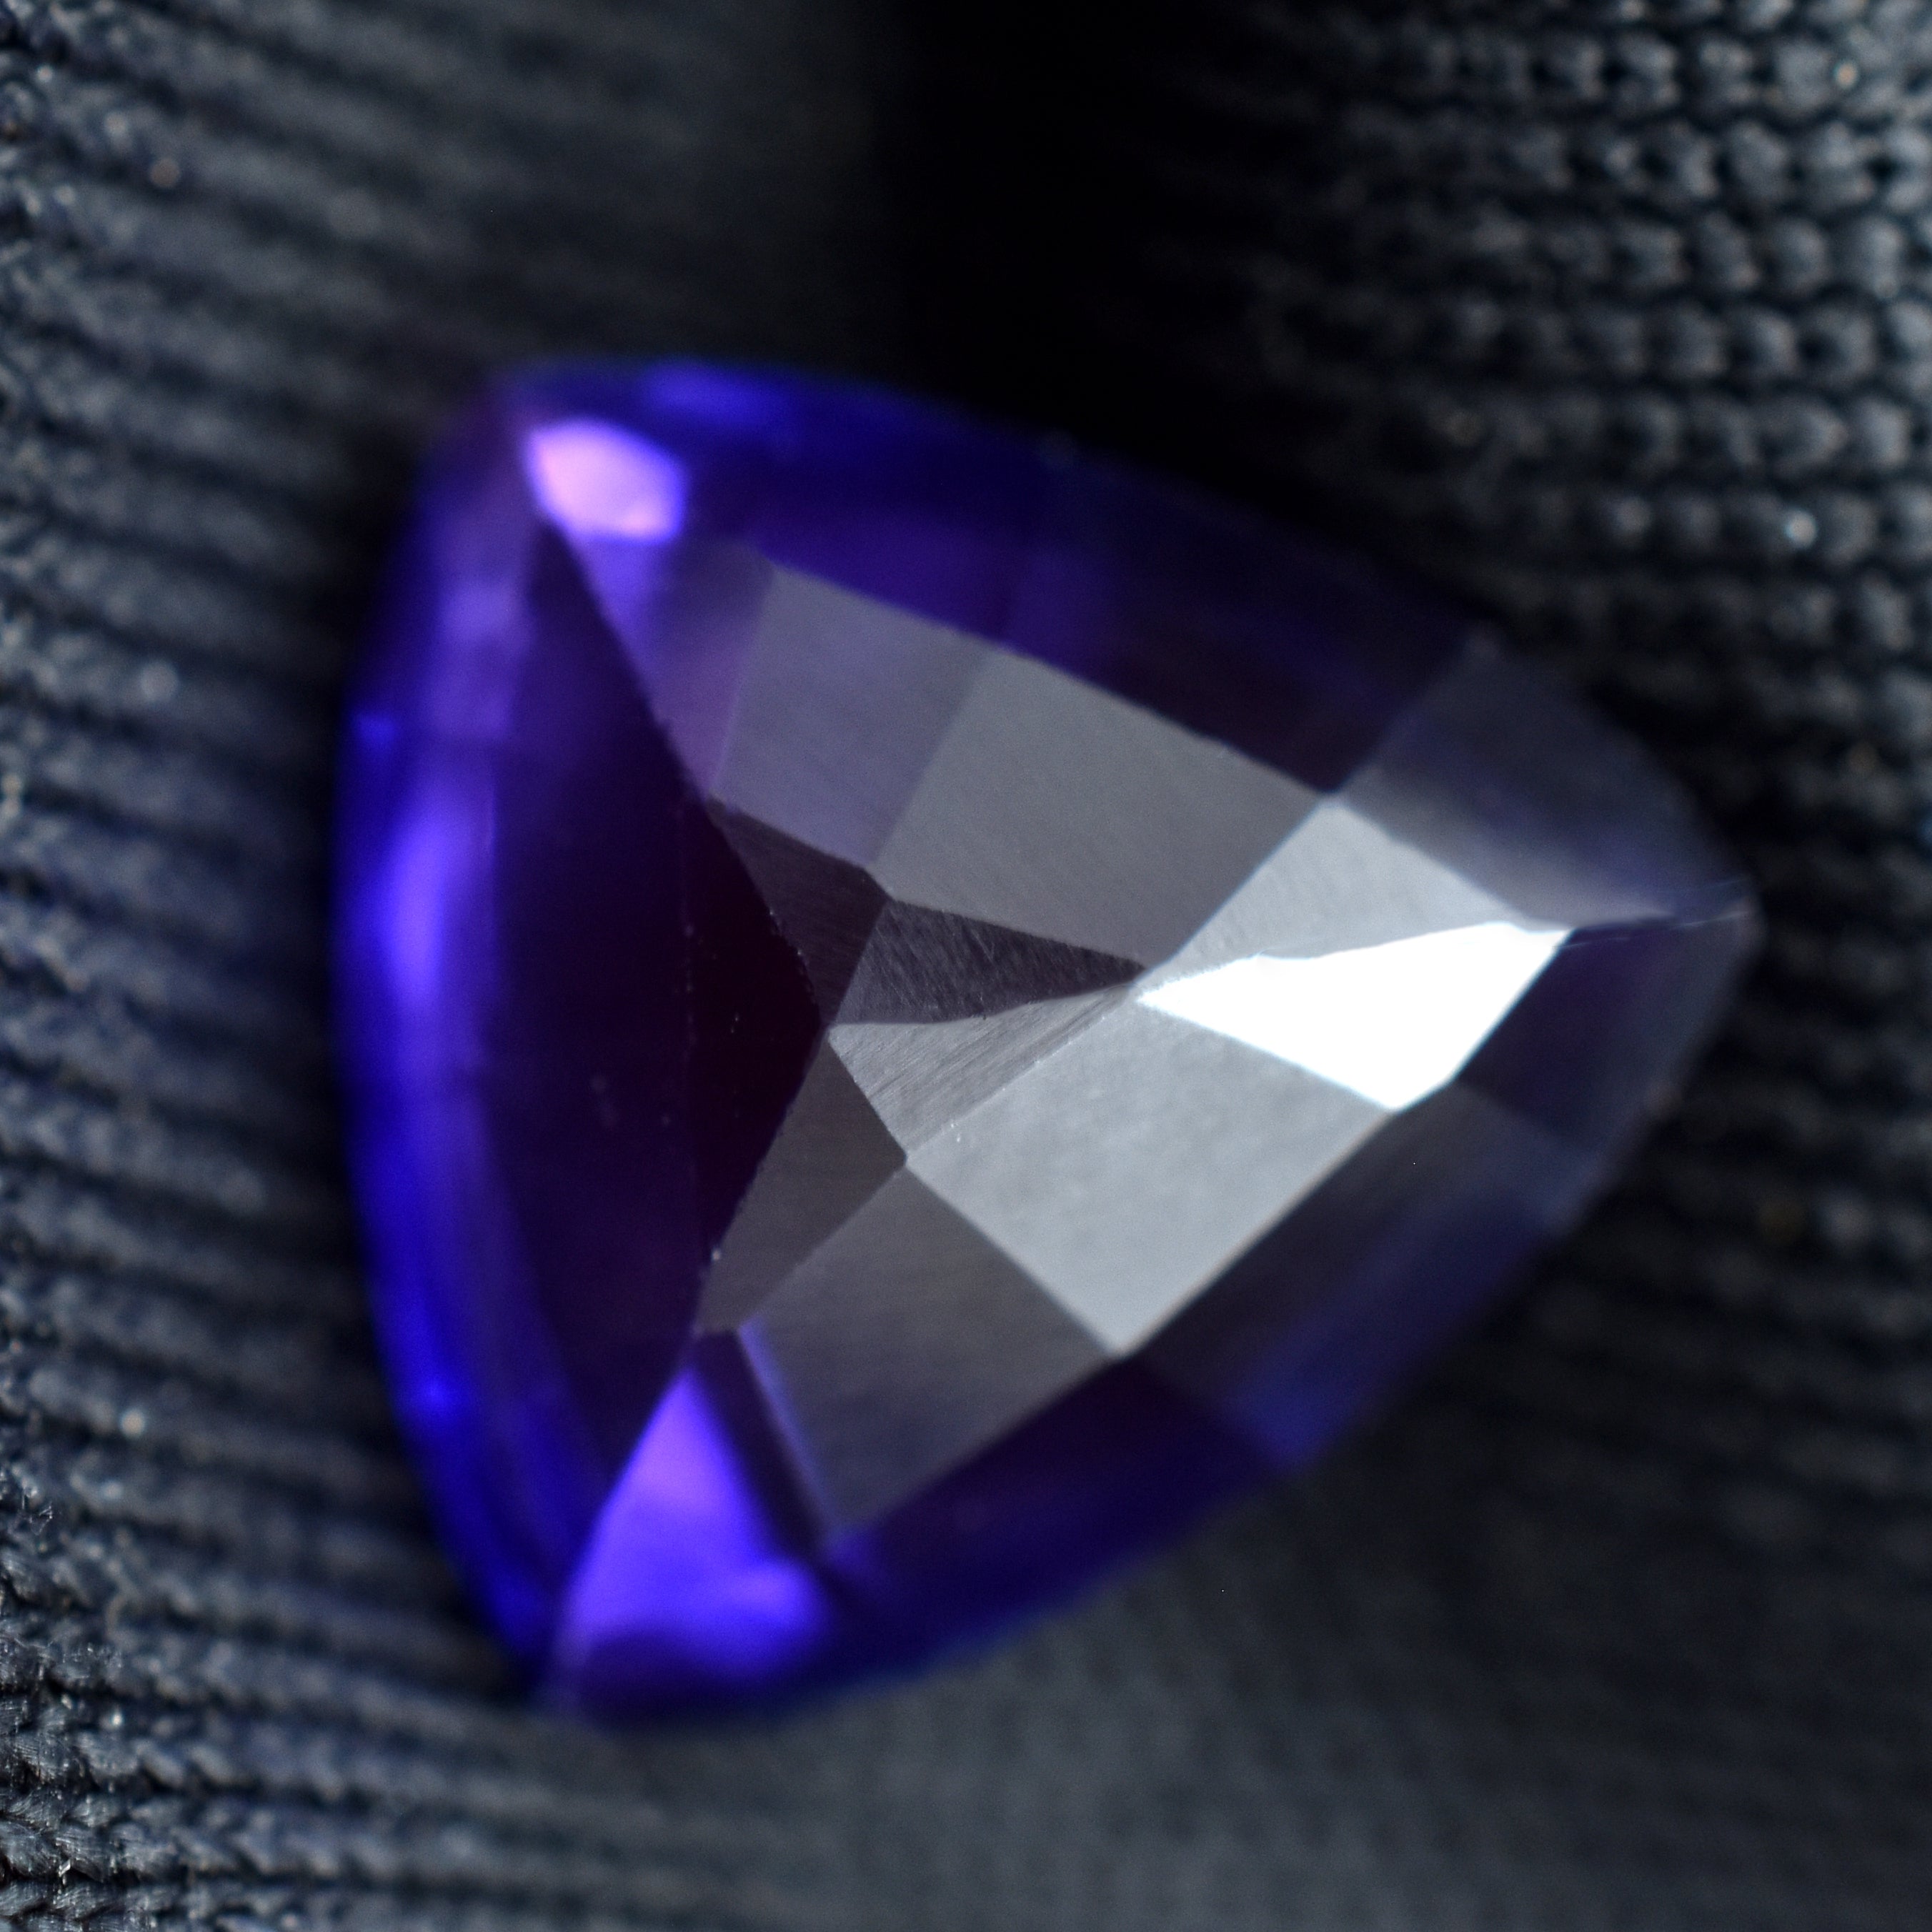 Natural Loose Gemstone faceted Trillion Cut Attractive Stone 12.52 Ct Purple Sapphire CERTIFEID Color Change Trillion Cut Gem | Best For Symbolism & Versatility | Free Shipping With Amazing Gift